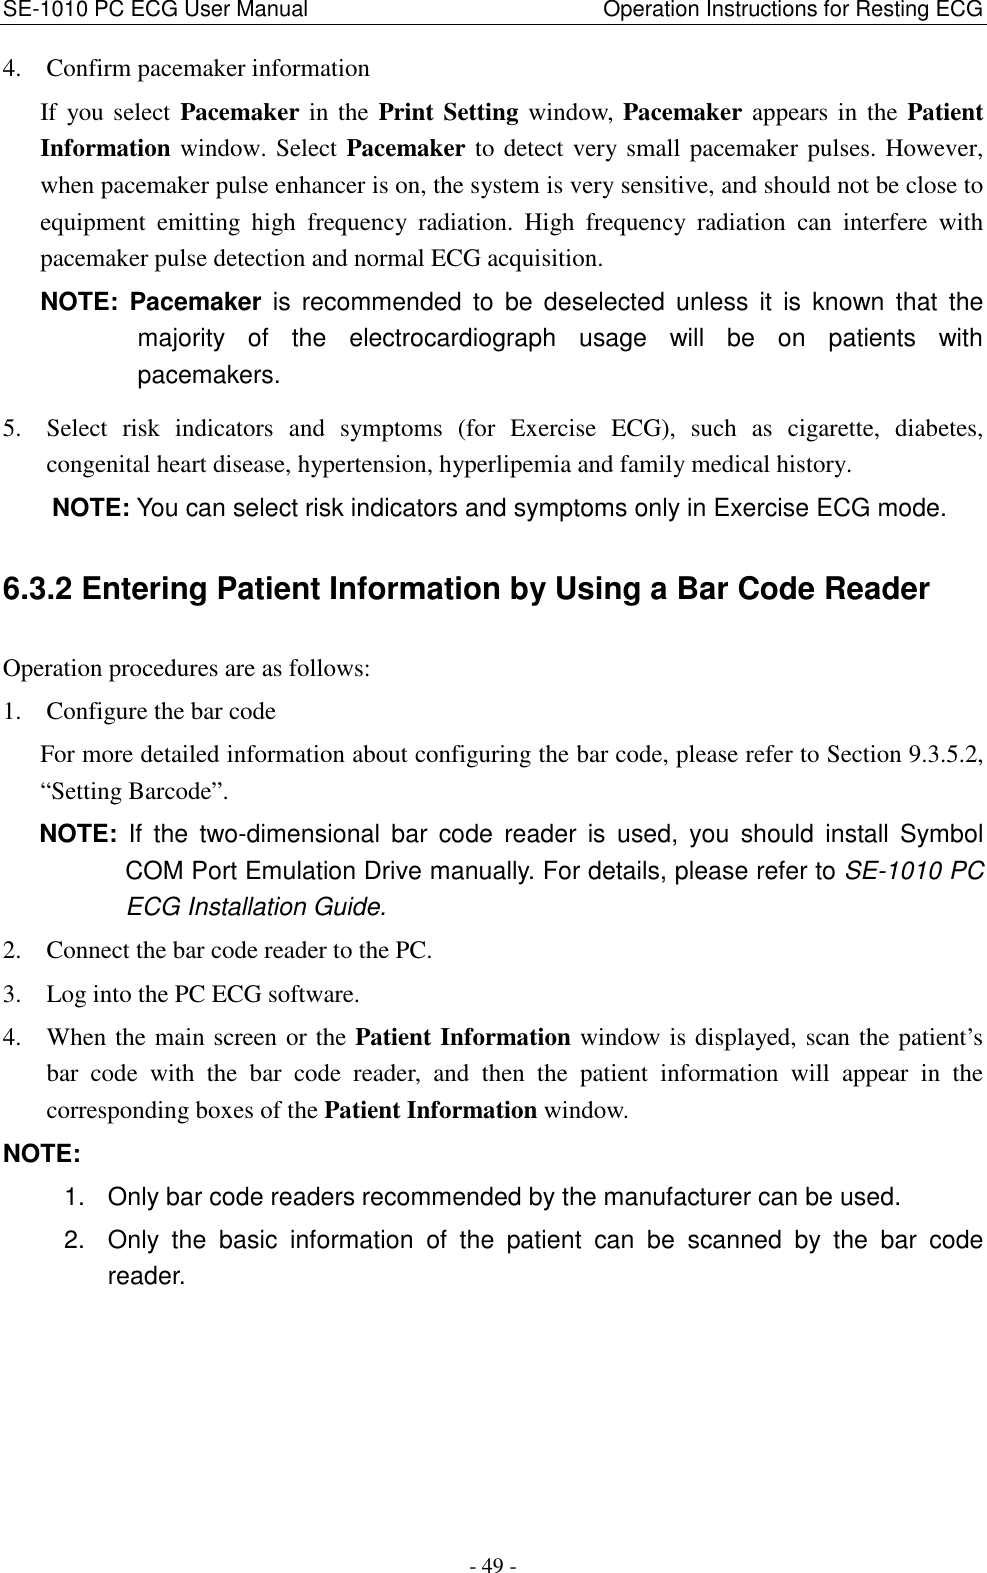 SE-1010 PC ECG User Manual                                                      Operation Instructions for Resting ECG - 49 - 4. Confirm pacemaker information If you select  Pacemaker in the Print Setting  window, Pacemaker appears in the Patient Information window. Select Pacemaker to detect very small pacemaker pulses. However, when pacemaker pulse enhancer is on, the system is very sensitive, and should not be close to equipment  emitting  high  frequency  radiation.  High  frequency  radiation  can  interfere  with pacemaker pulse detection and normal ECG acquisition. NOTE:  Pacemaker  is  recommended  to  be  deselected  unless  it  is  known  that  the majority  of  the  electrocardiograph  usage  will  be  on  patients  with pacemakers. 5. Select  risk  indicators  and  symptoms  (for  Exercise  ECG),  such  as  cigarette,  diabetes, congenital heart disease, hypertension, hyperlipemia and family medical history. NOTE: You can select risk indicators and symptoms only in Exercise ECG mode. 6.3.2 Entering Patient Information by Using a Bar Code Reader Operation procedures are as follows: 1. Configure the bar code For more detailed information about configuring the bar code, please refer to Section 9.3.5.2, “Setting Barcode”. NOTE:  If  the  two-dimensional  bar  code  reader  is  used,  you  should  install  Symbol COM Port Emulation Drive manually. For details, please refer to SE-1010 PC ECG Installation Guide. 2. Connect the bar code reader to the PC. 3. Log into the PC ECG software. 4. When the main screen or the Patient Information window is displayed, scan the patient’s bar  code  with  the  bar  code  reader,  and  then  the  patient  information  will  appear  in  the corresponding boxes of the Patient Information window. NOTE:   1.  Only bar code readers recommended by the manufacturer can be used. 2.  Only  the  basic  information  of  the  patient  can  be  scanned  by  the  bar  code reader. 